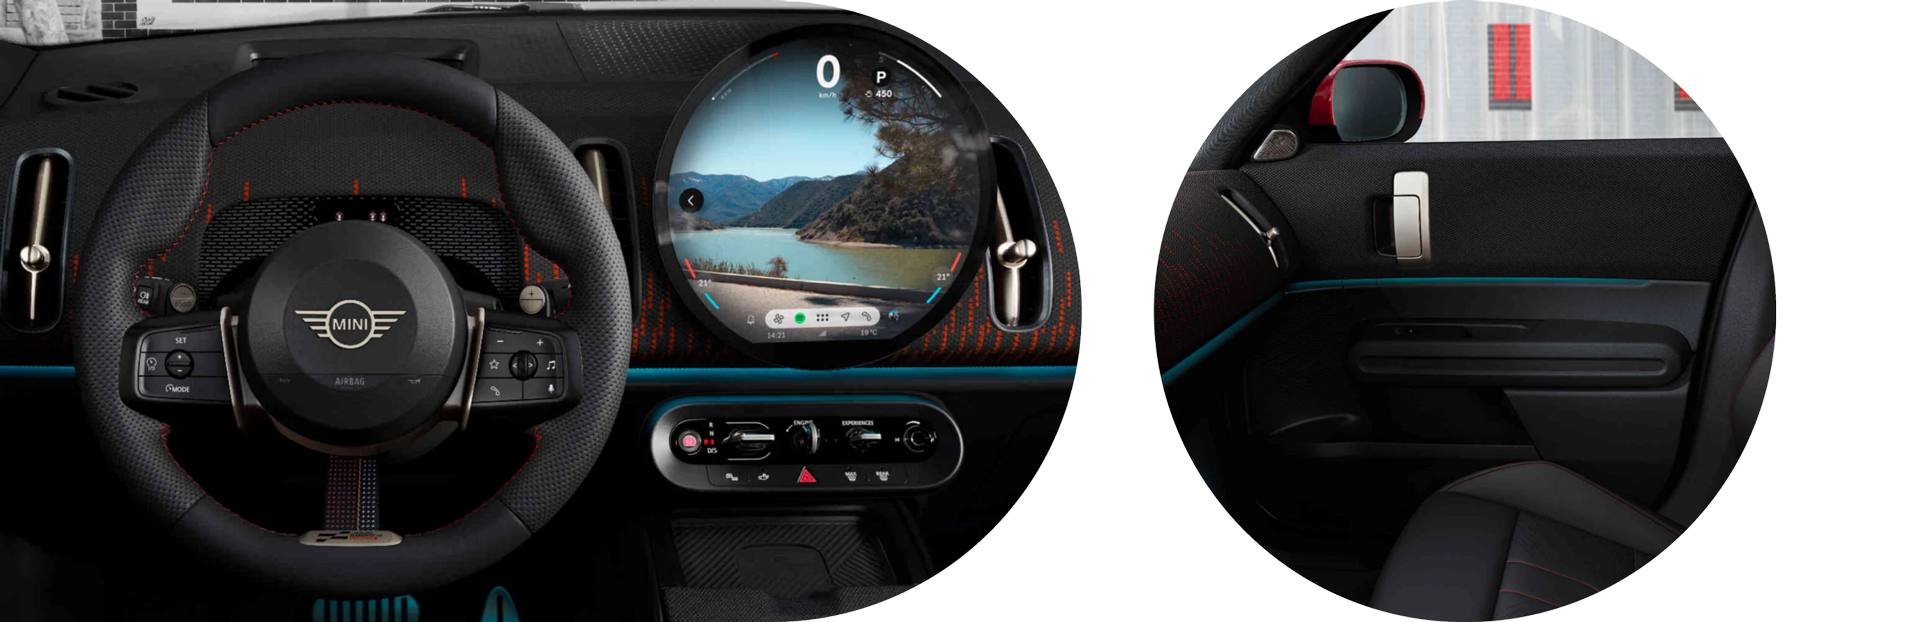 View of a MINI JCW Countryman ALL4’s sports steering wheel from the perspective of the driver’s seat. | View of the front passenger’s door within a MINI JCW Countryman ALL4 from the perspective of the driver’s seat.